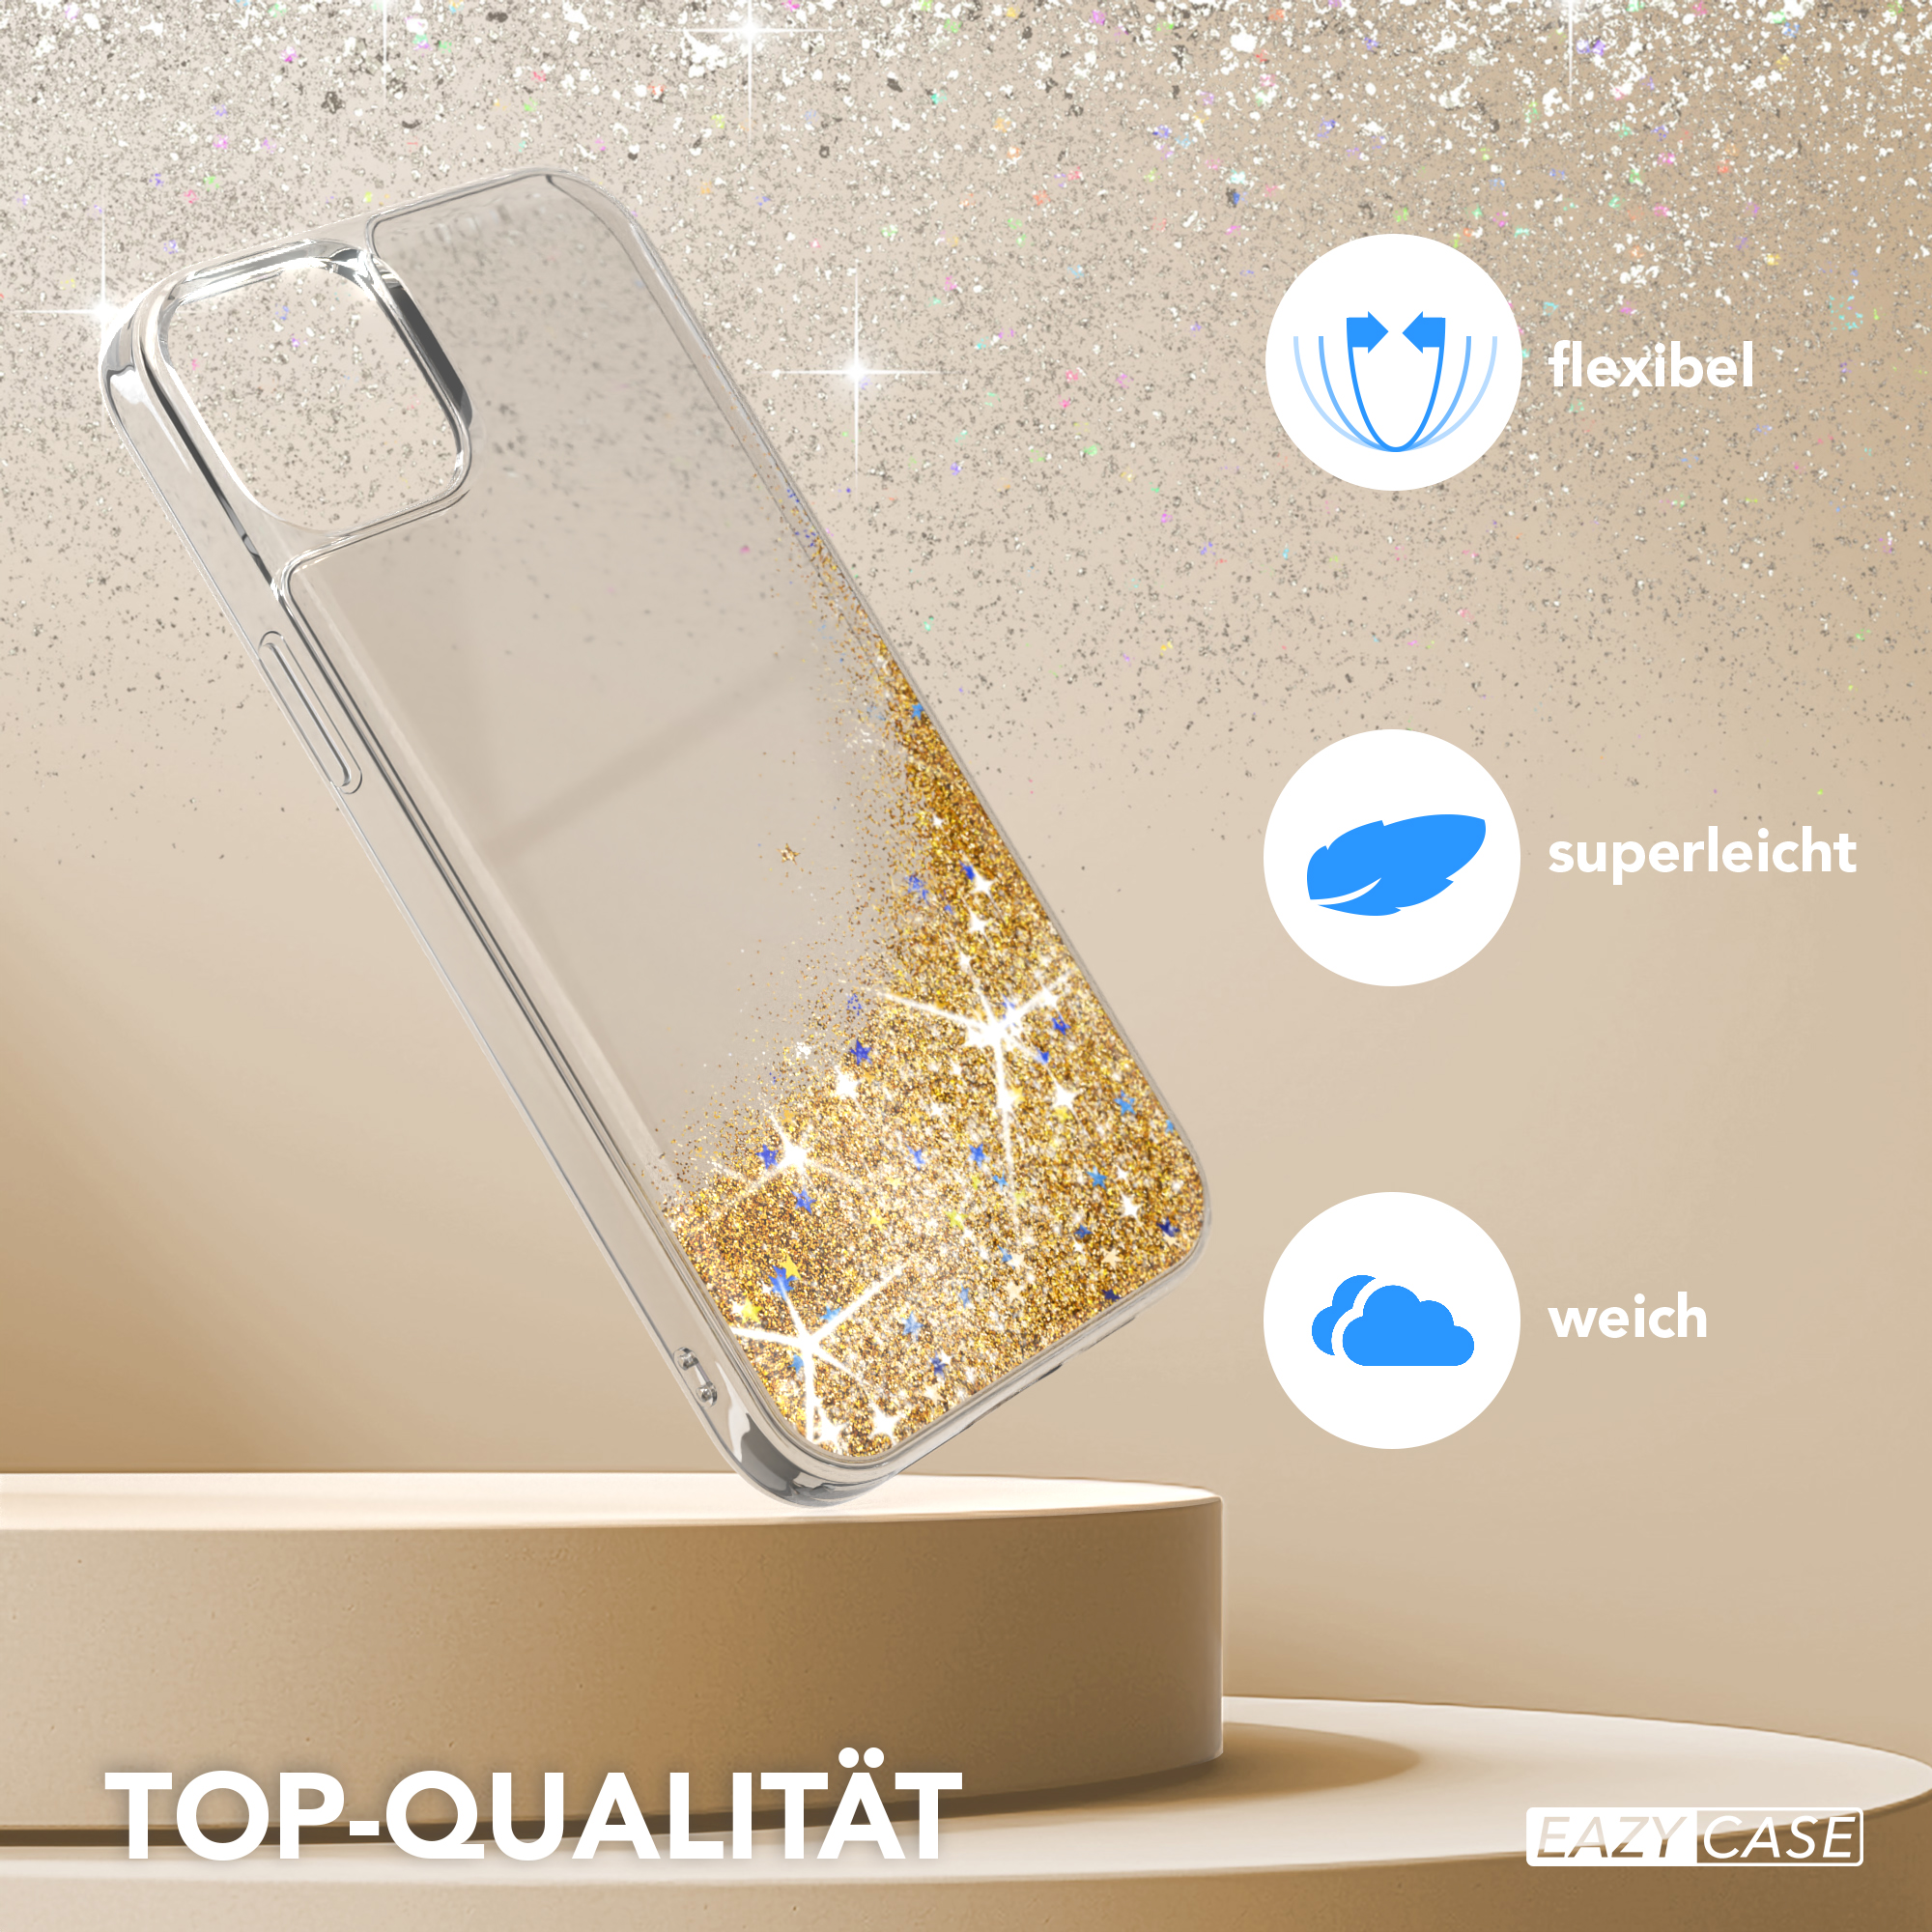 CASE Backcover, Liquid Apple, Gold Plus, EAZY 15 Glittery Case, iPhone